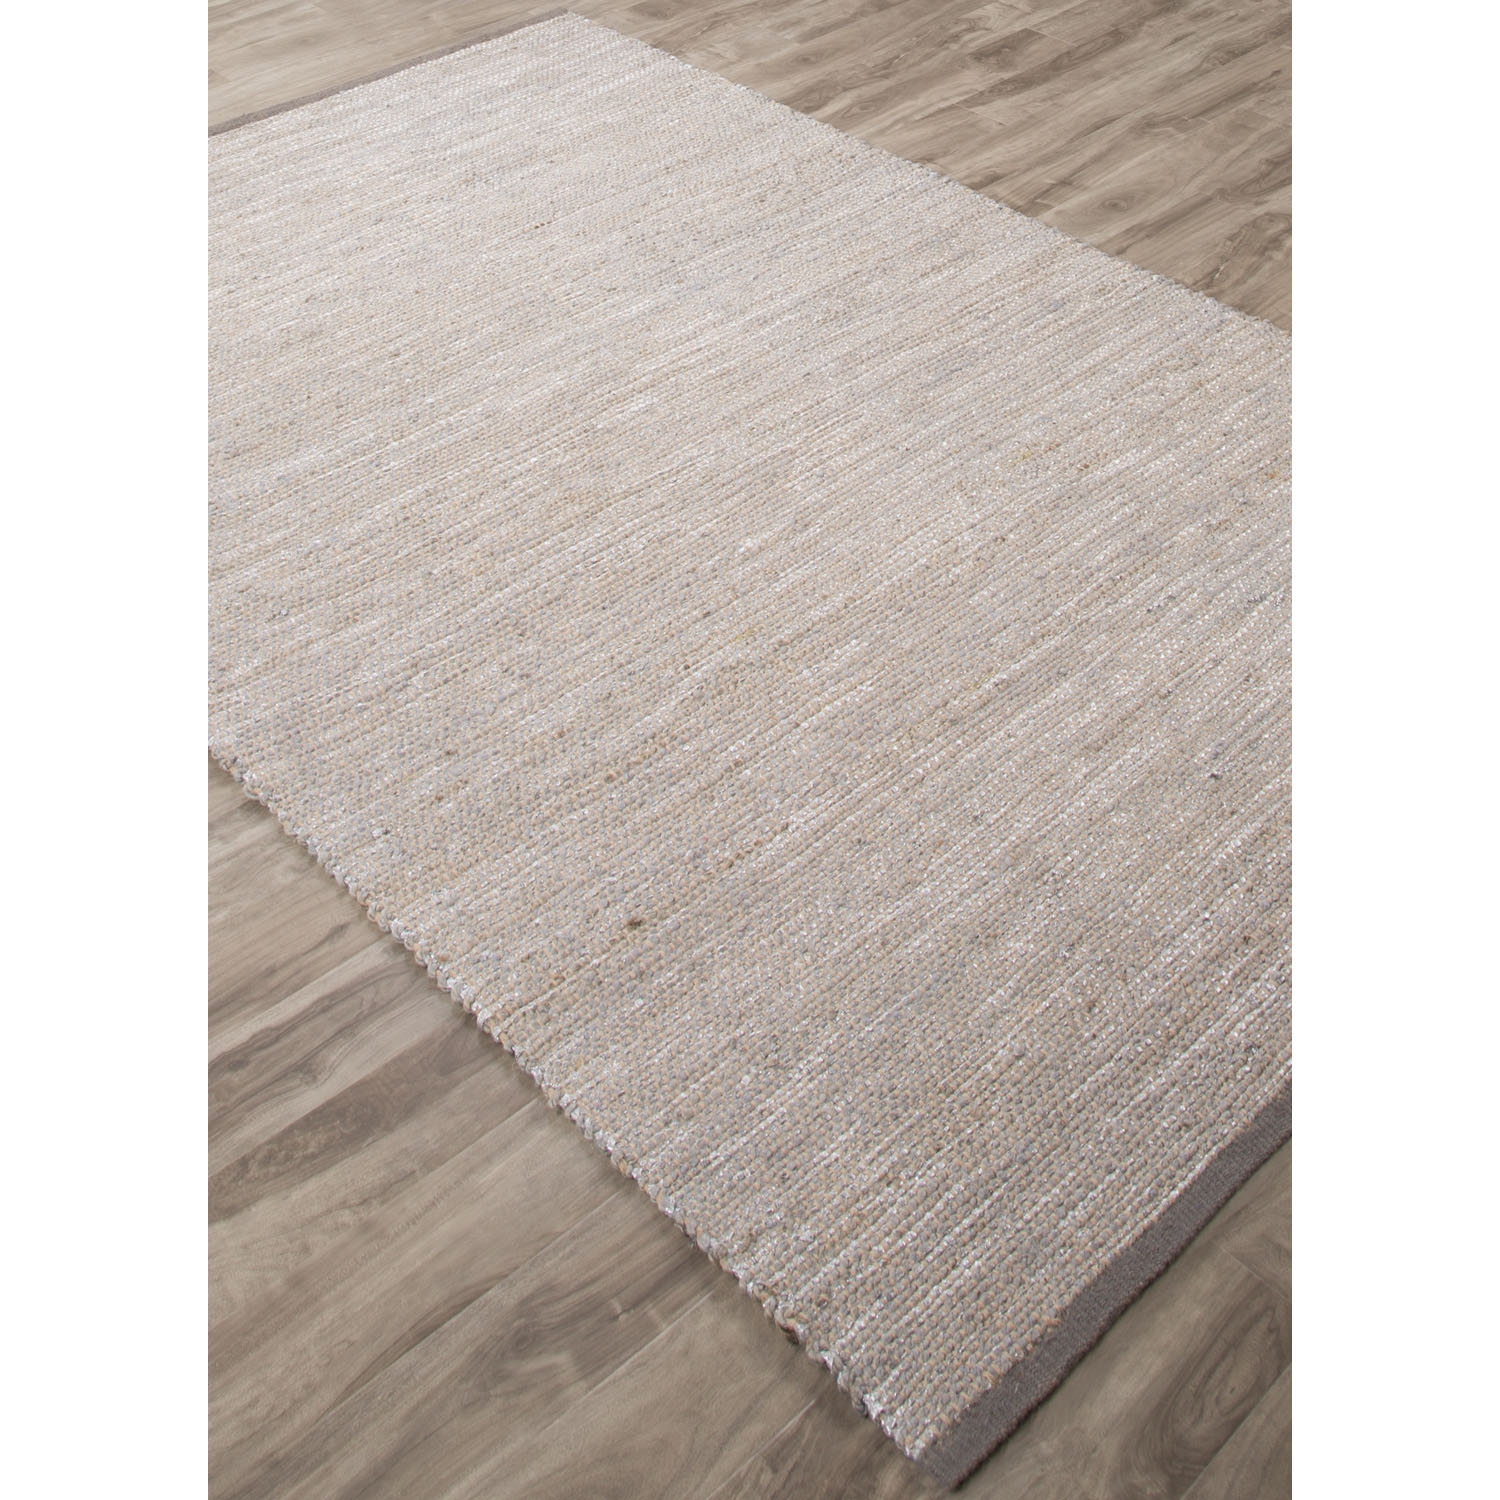 Nikki Chu by Vega Natural Solid Gray/ Silver Square Area Rug (8' X 8') - Image 1